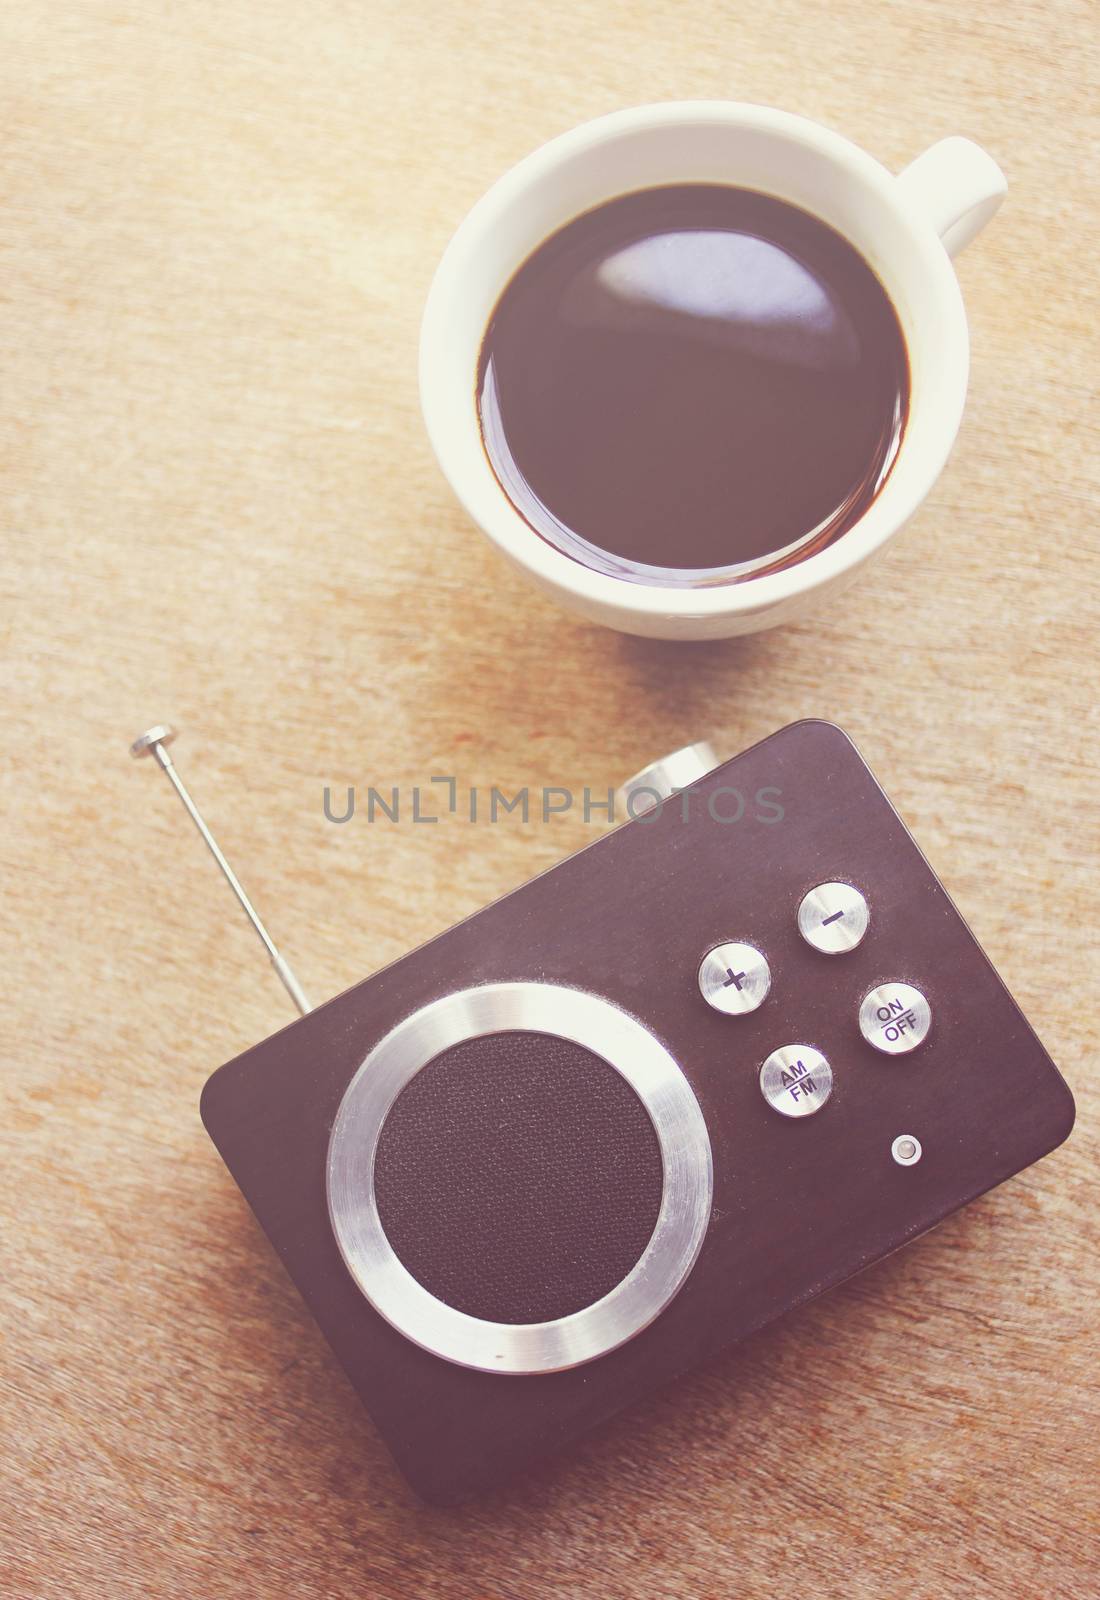 Retro radio and black coffee with retro filter effect by nuchylee